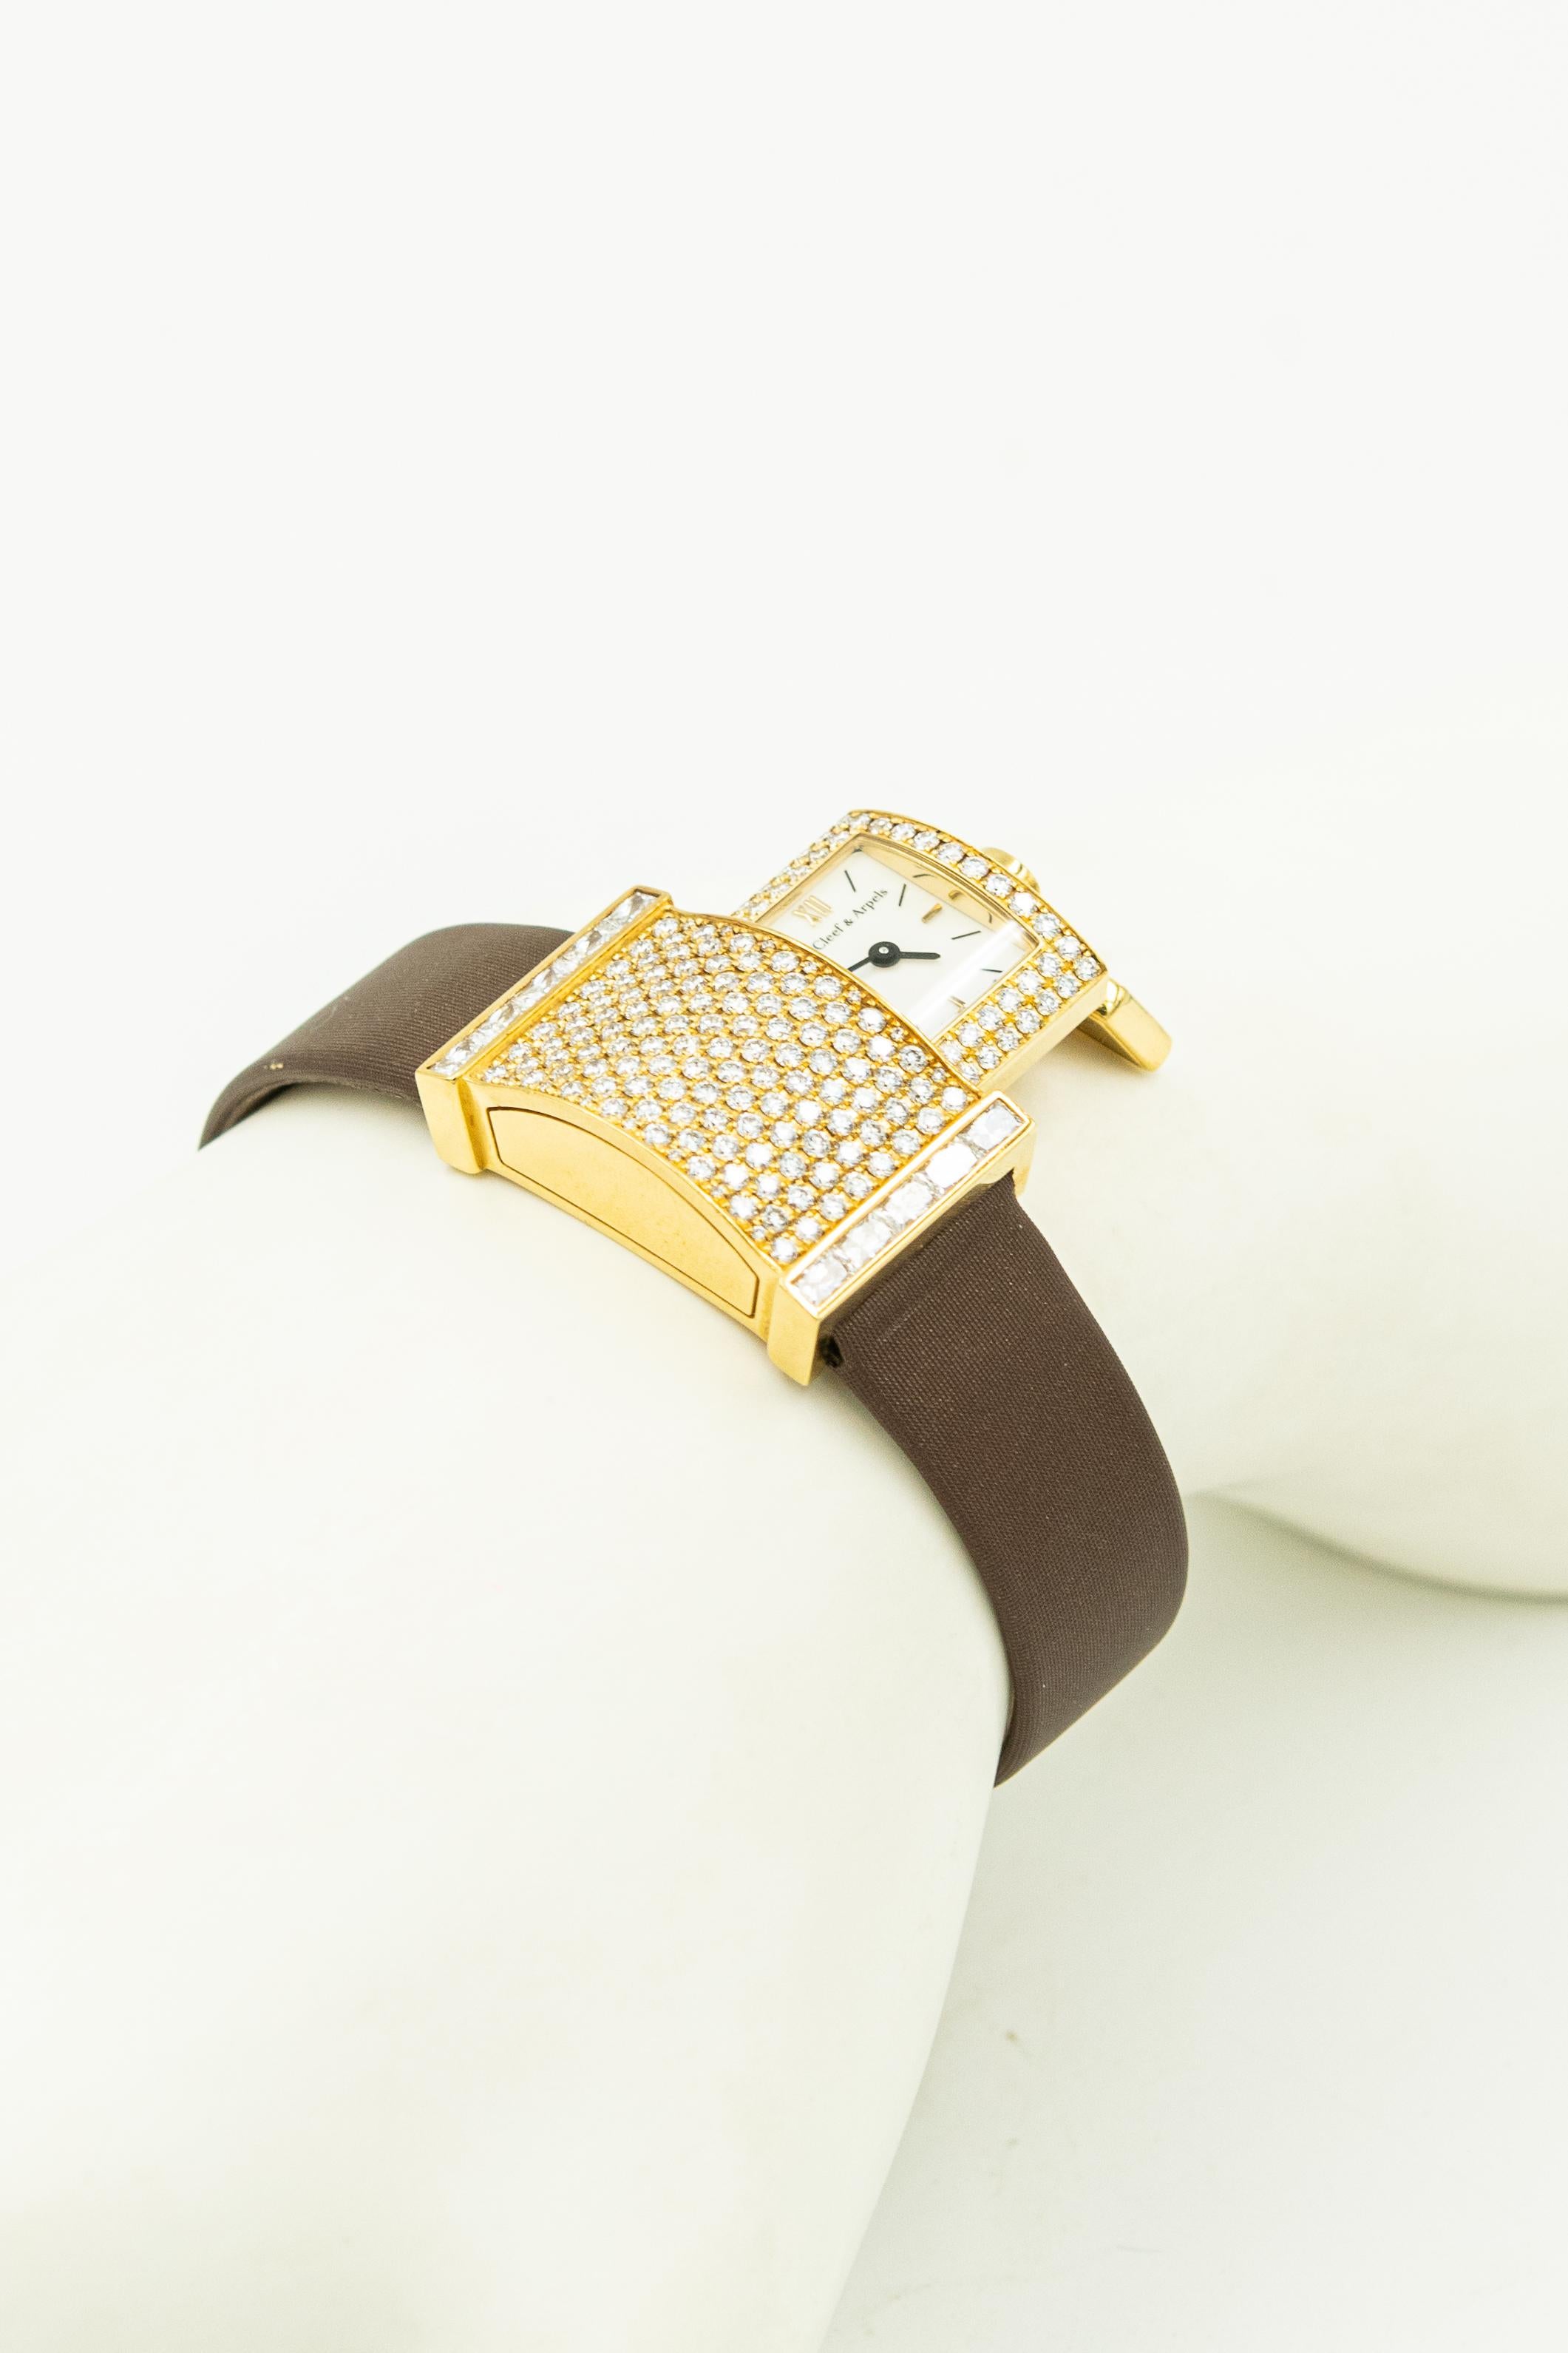 Van Cleef & Arpels Secret Pavée Diamond 18k yellow ladies watch Ref. VCA 1434 Serial #1386101 featuring a rectangular flared case measuring 29 mm x 18 mm. It has a white dial, black markers ,a Swiss quartz movement, hidden within a jeweled drawer.